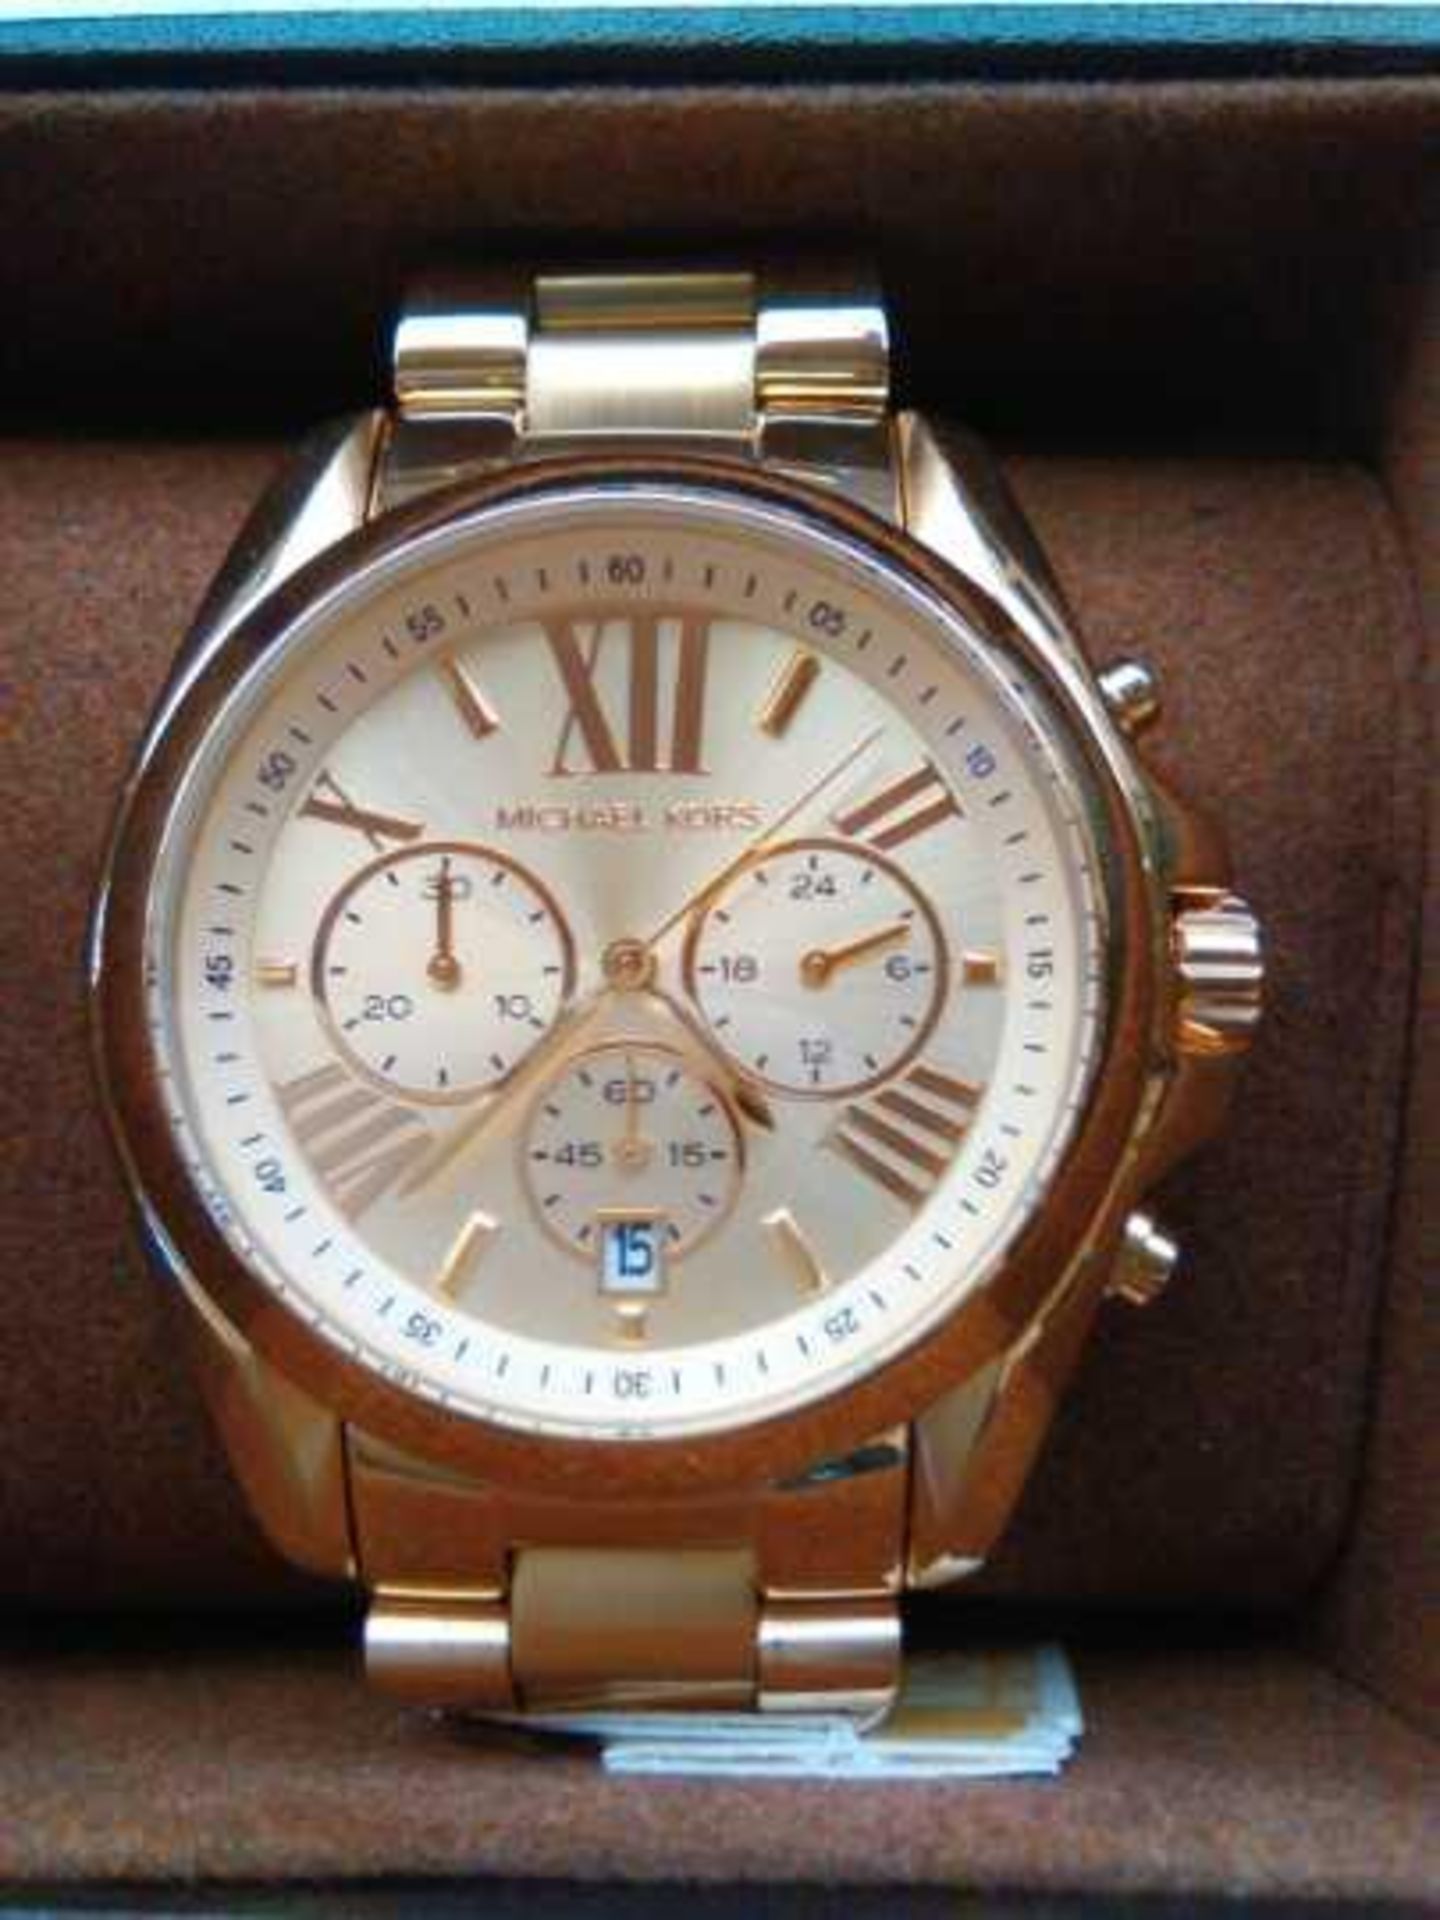 Michael Kors MK5605 ladies watch, new and ticking in presentation box.